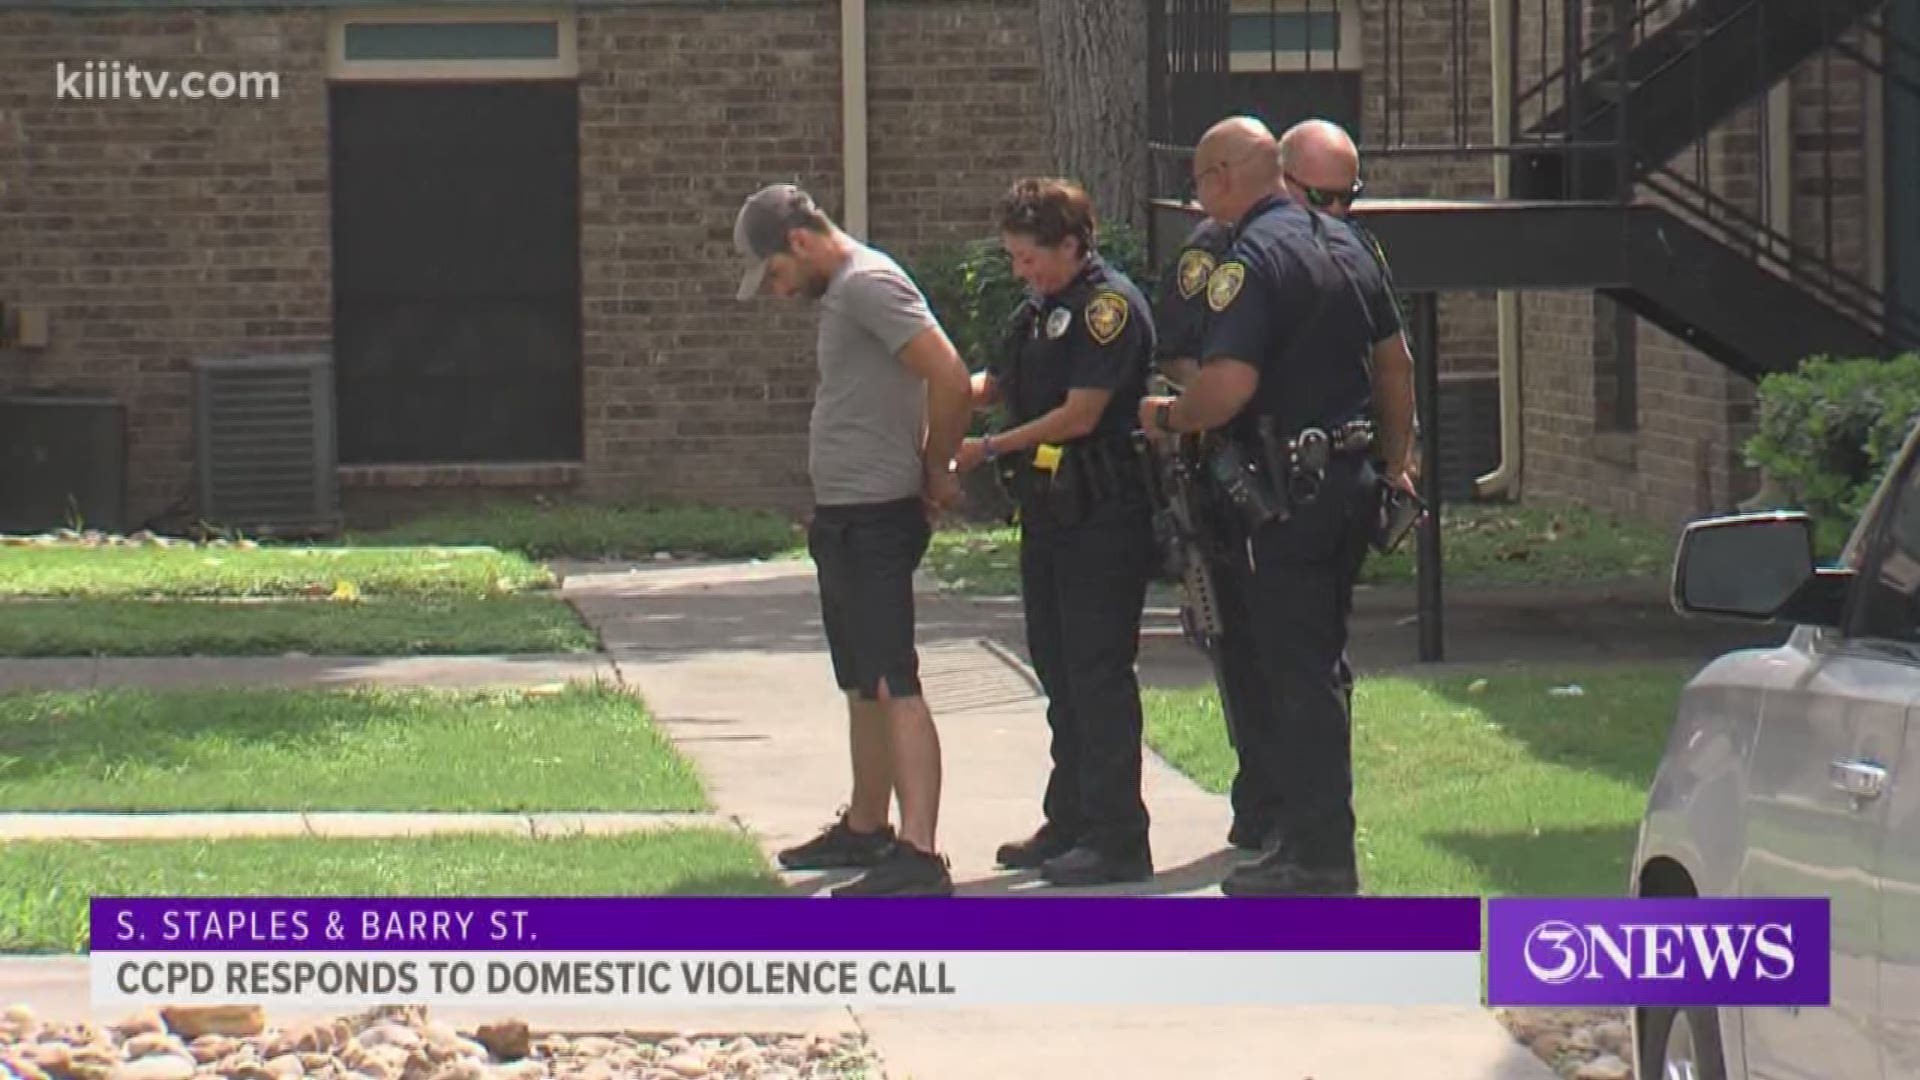 Corpus Christi police were called to an apartment complex Monday after receiving reports of a domestic violence issue.